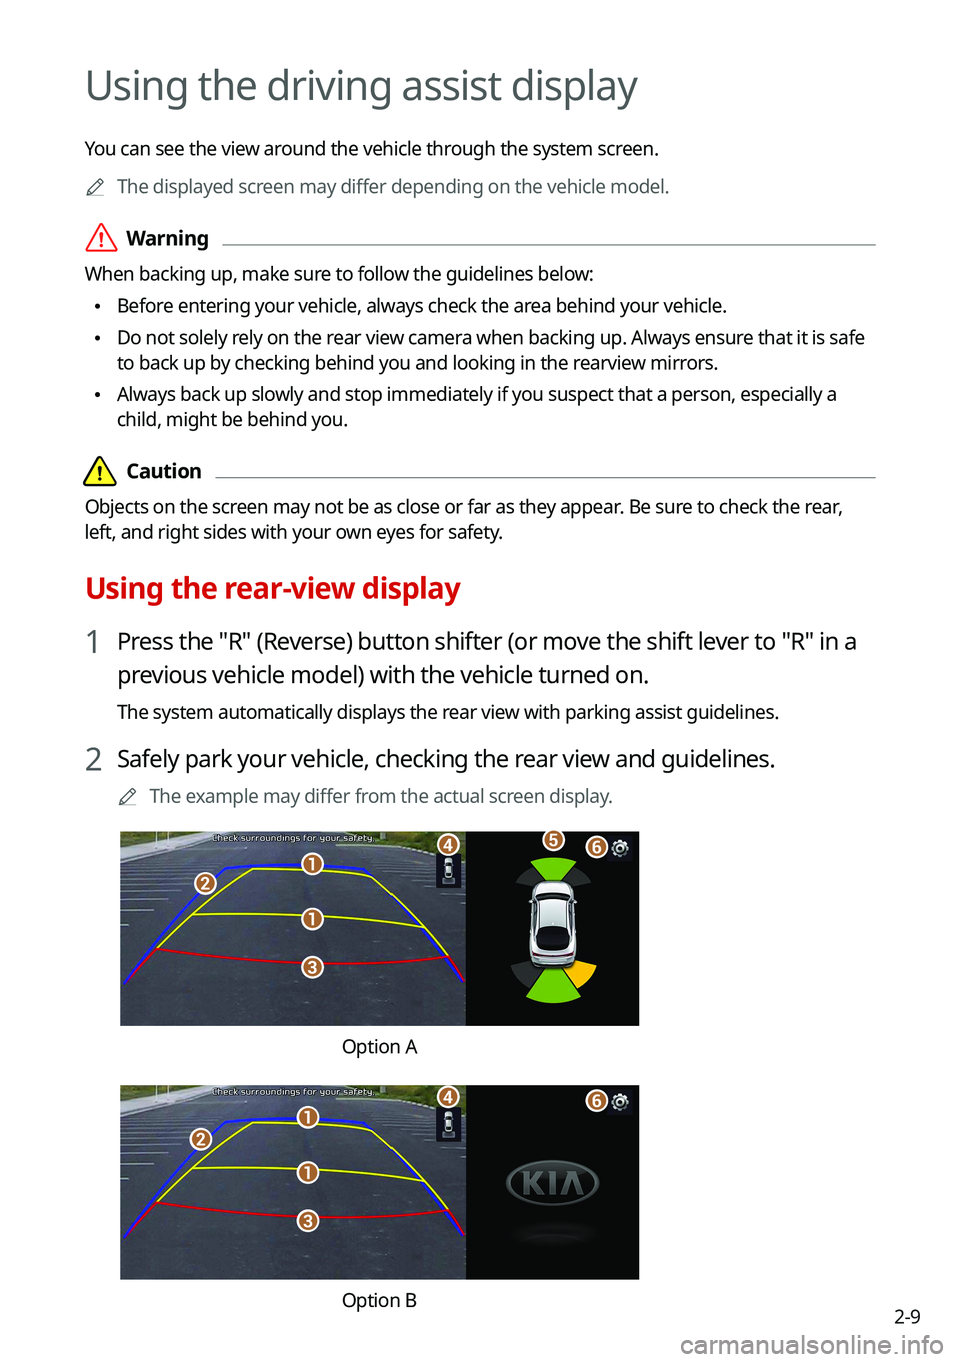 KIA K5 2021  Navigation System Quick Reference Guide 2-9
Using the driving assist display
You can see the view around the vehicle through the system screen.0000
A
The displayed screen may differ depending on the vehicle model.
 \335Warning
When backing 